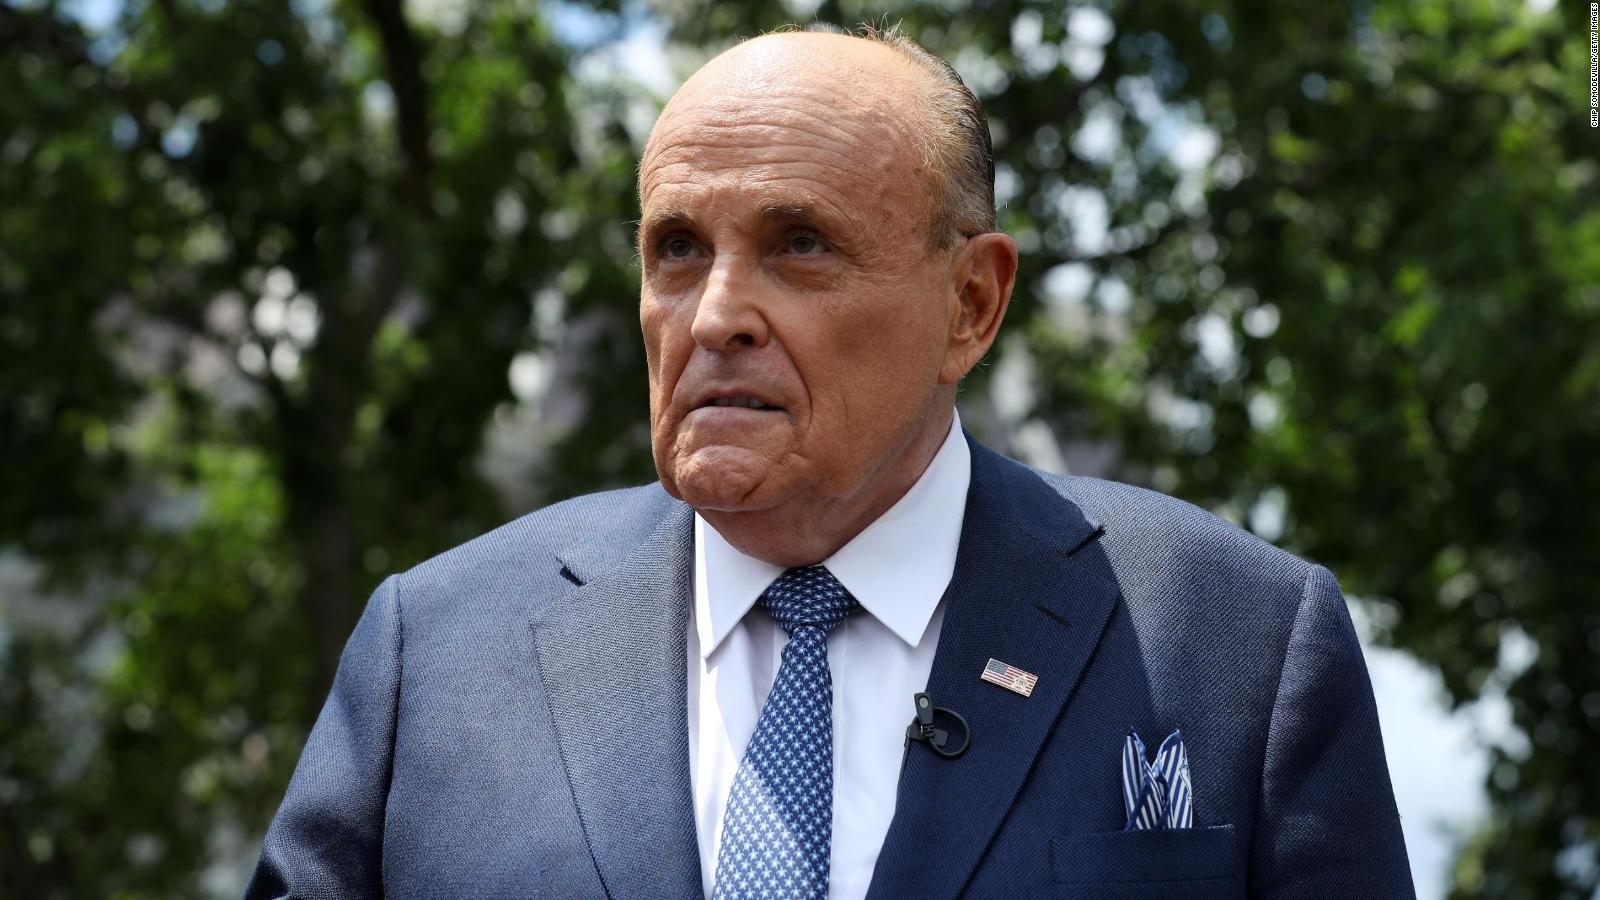 Rudy Giuliani suspended from practicing law in New York state - CNNPolitics